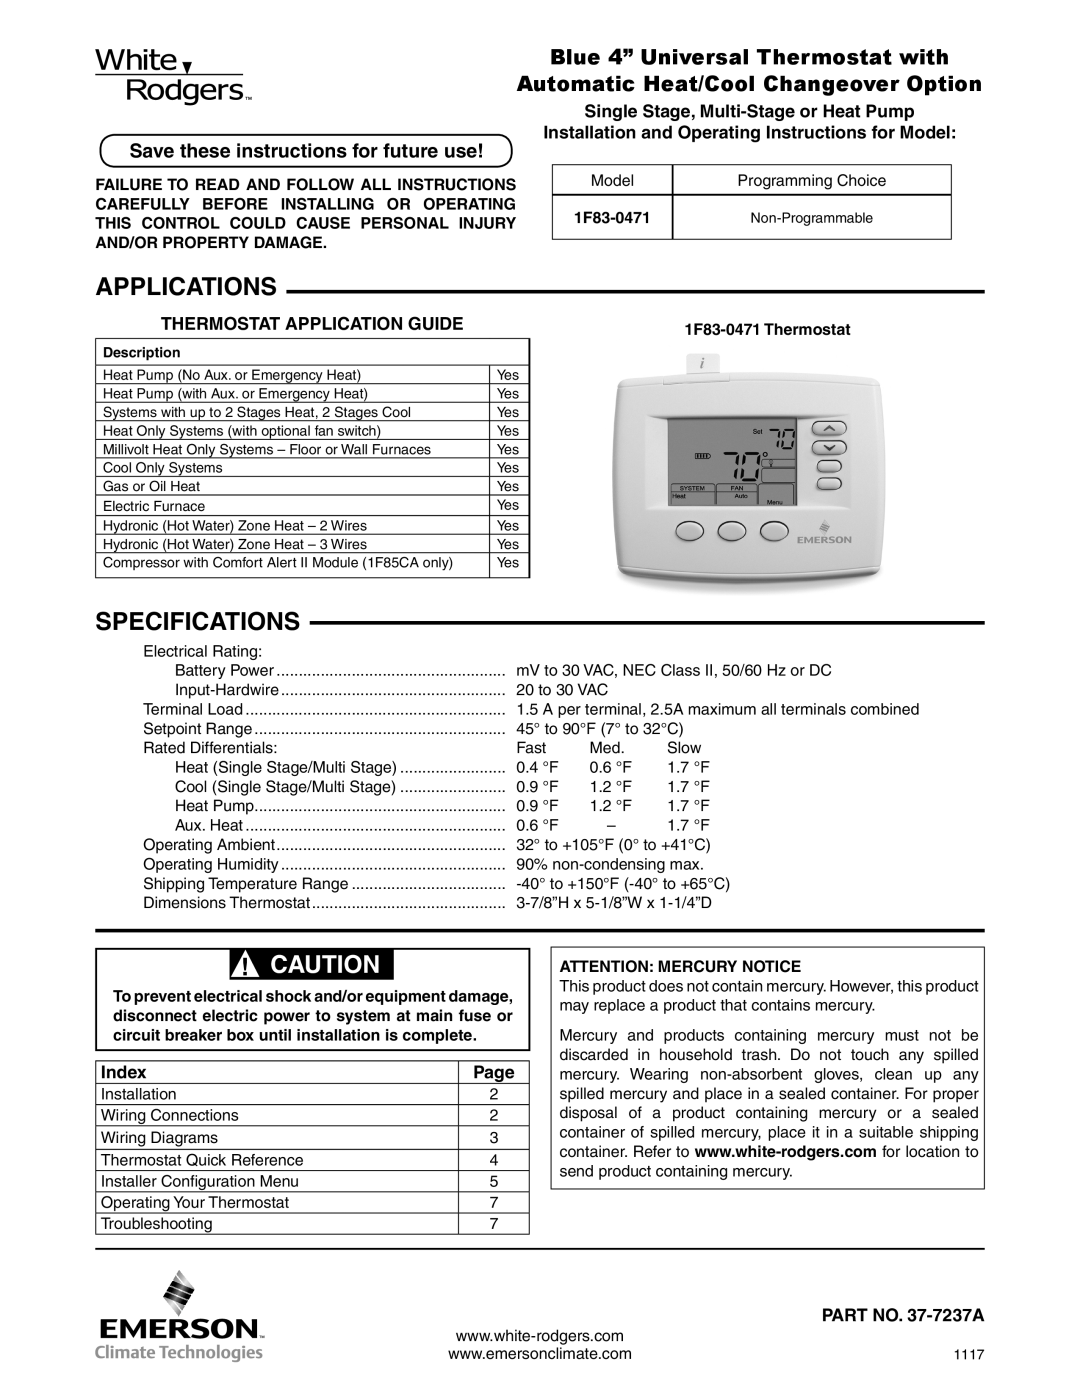 White Rodgers 37-7237A specifications Applications, Specifications, Save these instructions for future use, Index, Page 